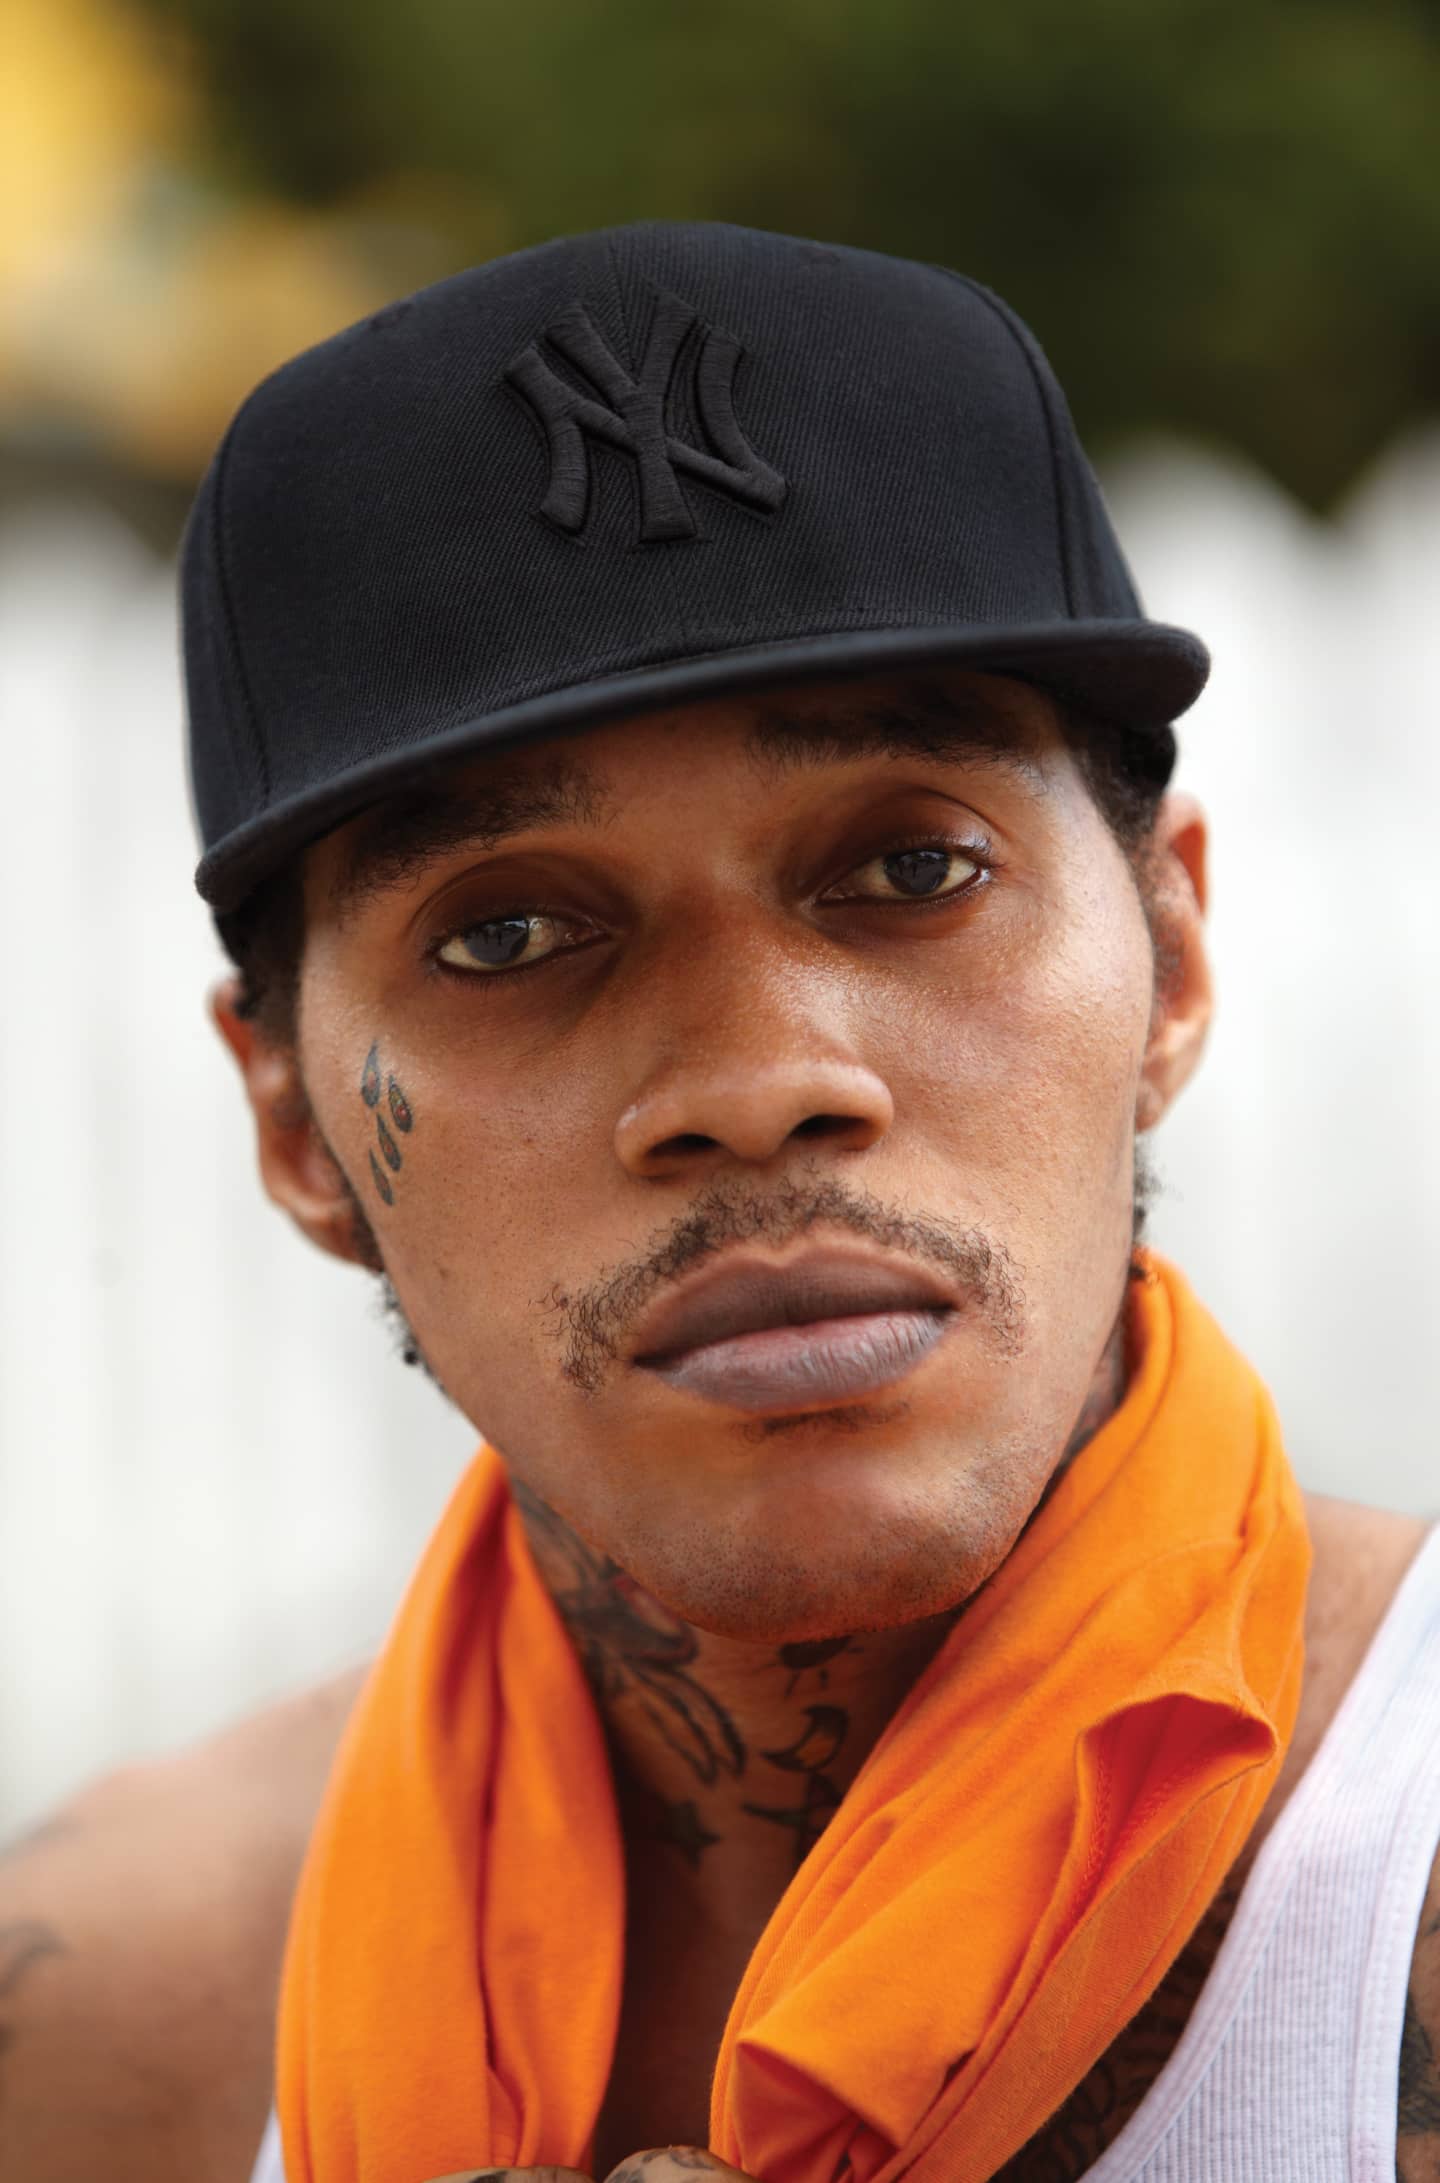 Vybz Kartel Beyond The Pale The Fader 2019 | massive b records. vybz kartel beyond the pale the fader